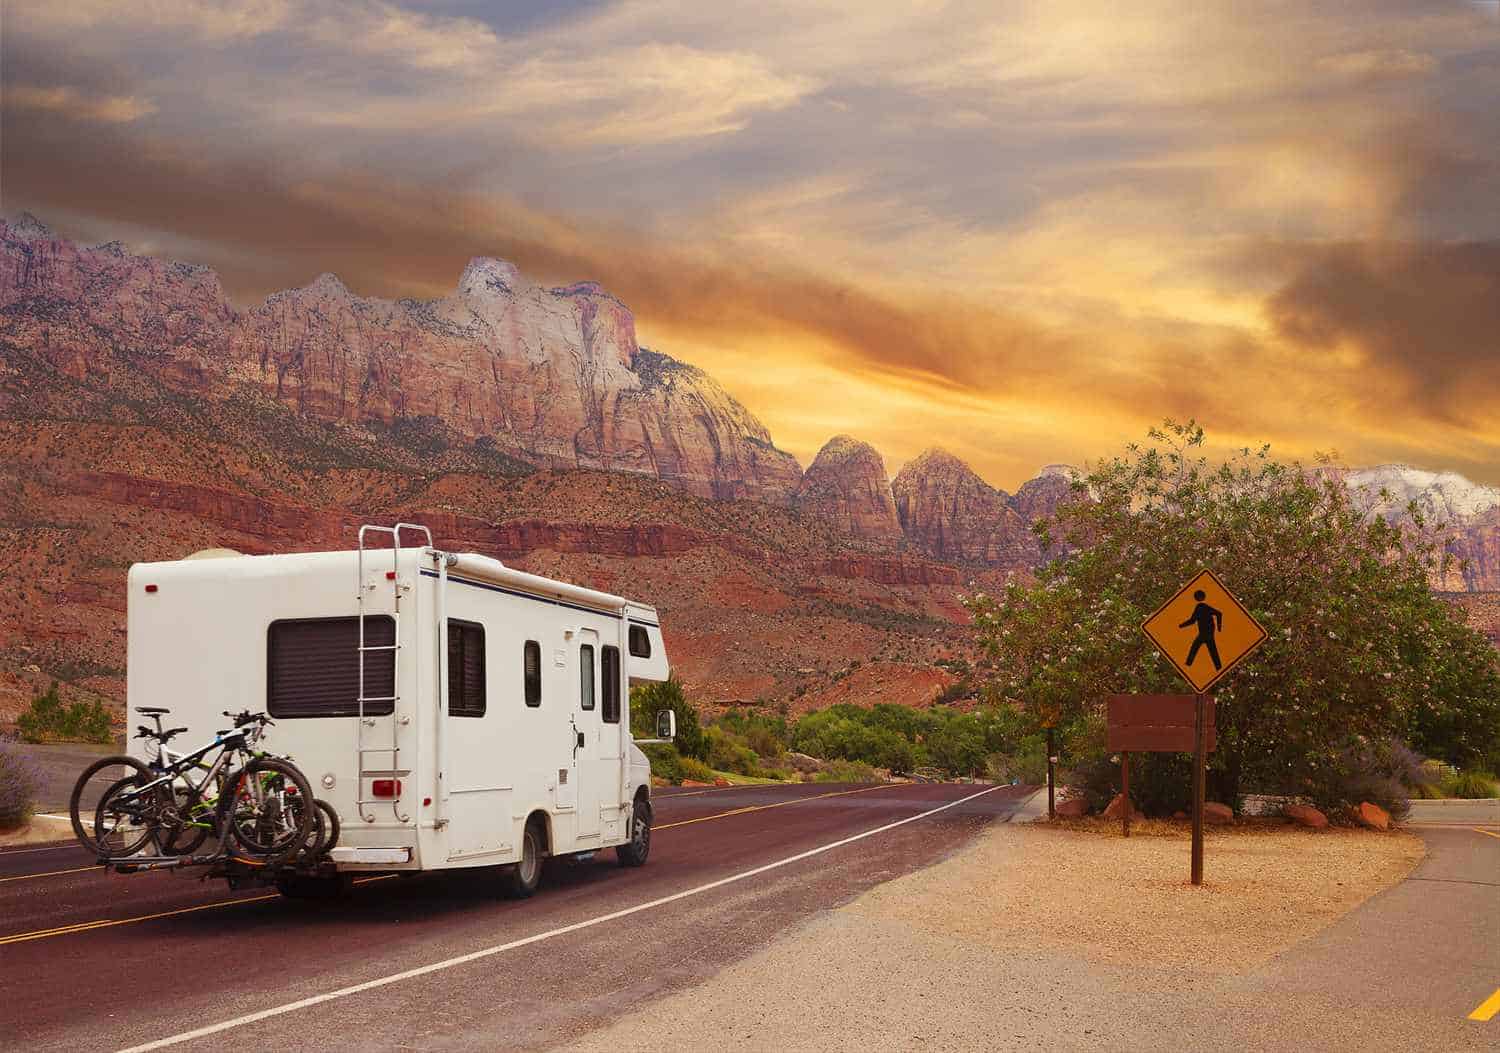 Safety tips for RV renters